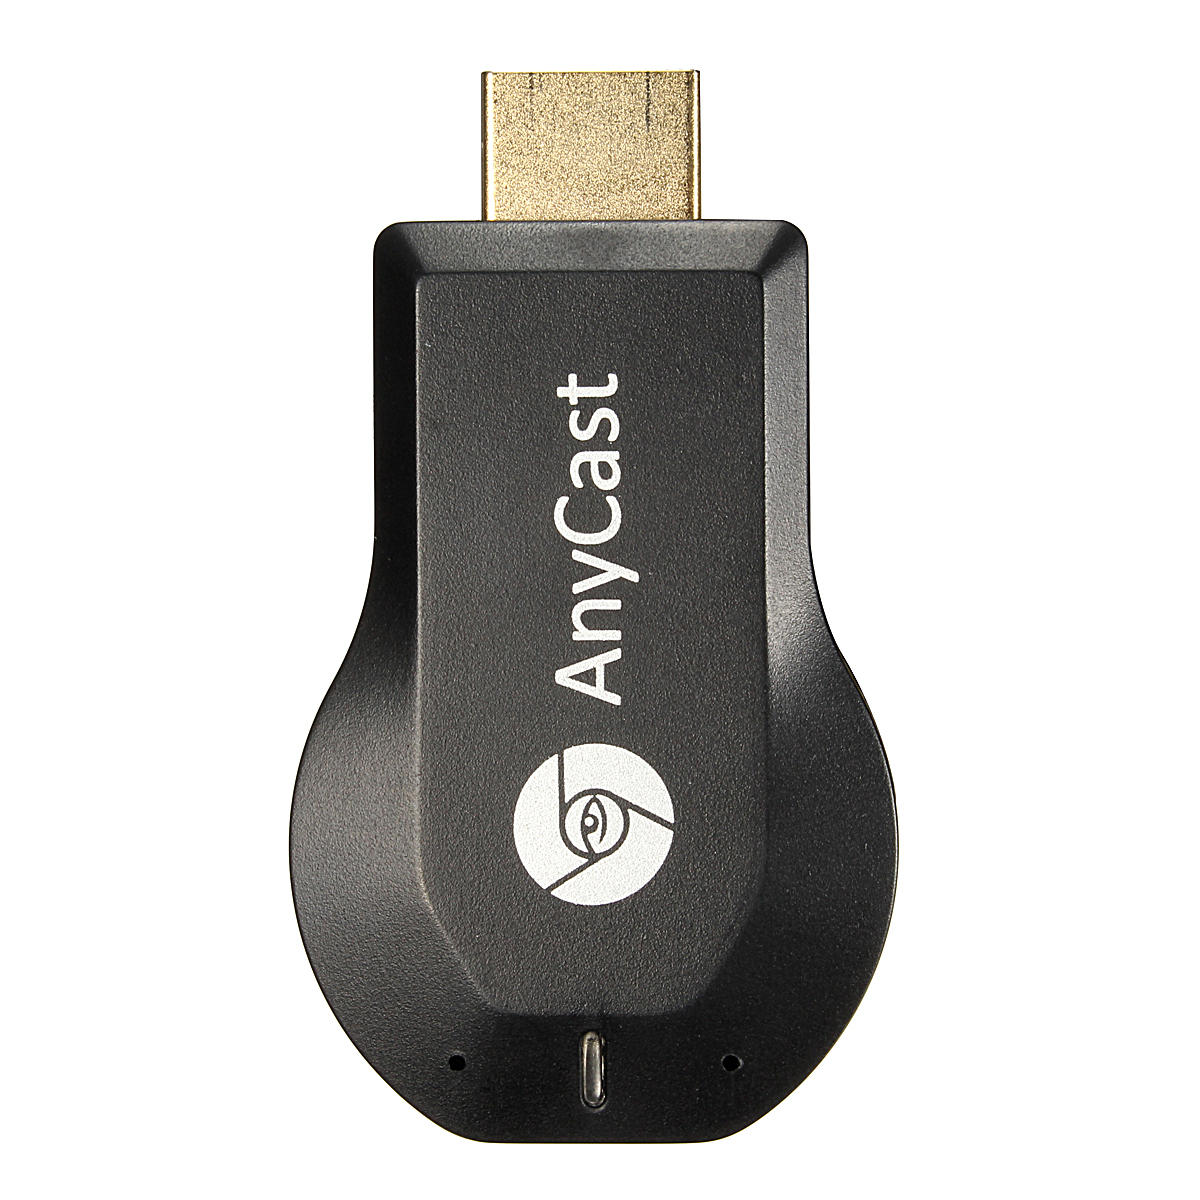 offertehitech-Miracast M2 HD 1080P Plus WiFi Display Dongle Miracast TV Dongle DLNA AirPlay